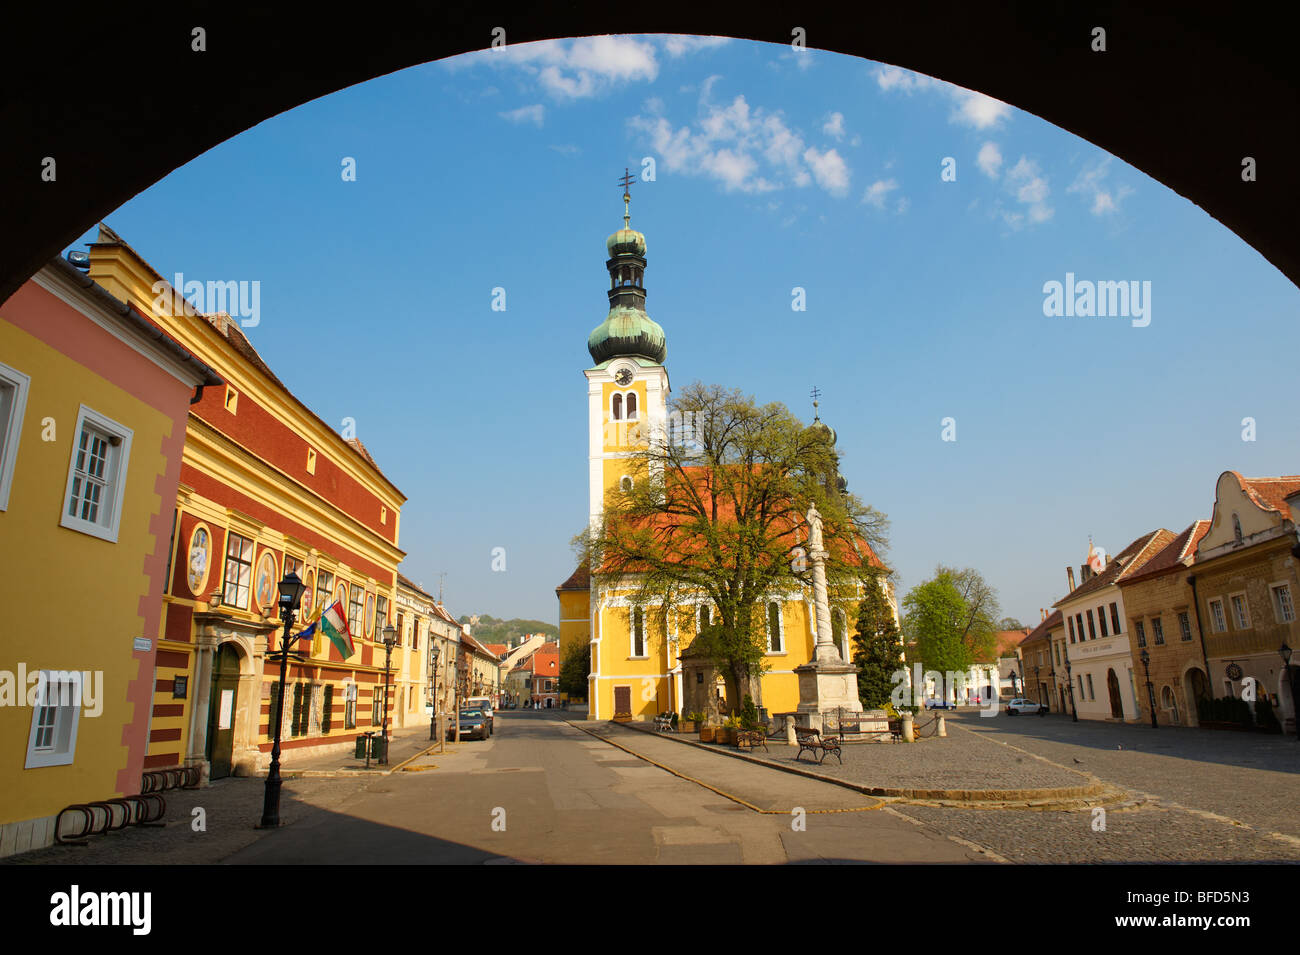 Old Town Square with St Stephan's (Istvan) church, Kőszeg Hungary Stock Photo